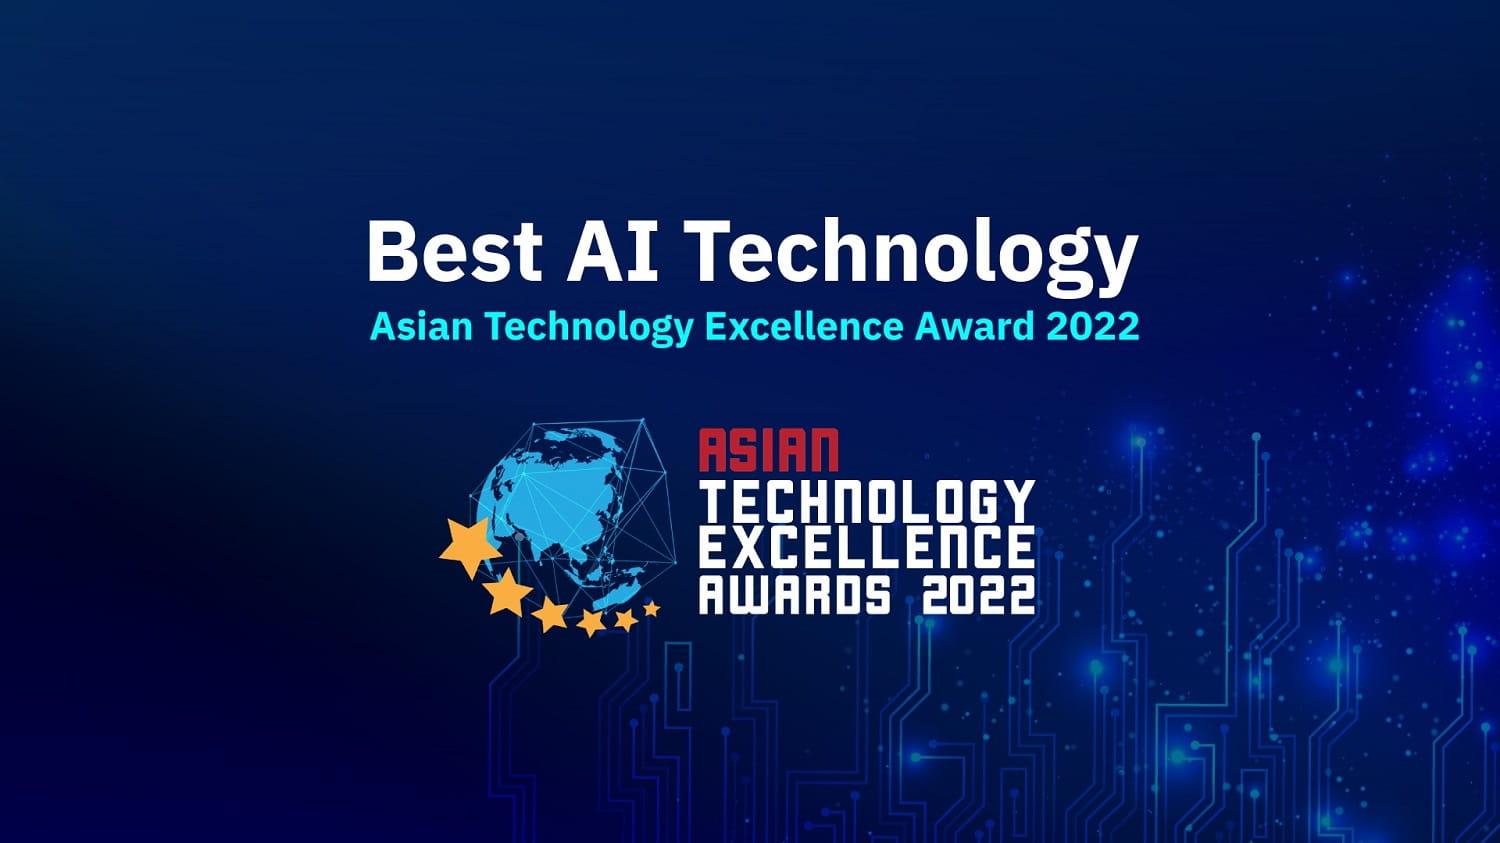 Asian Technology Excellent Awards is a prestigious award hosted by The Asian Business Review